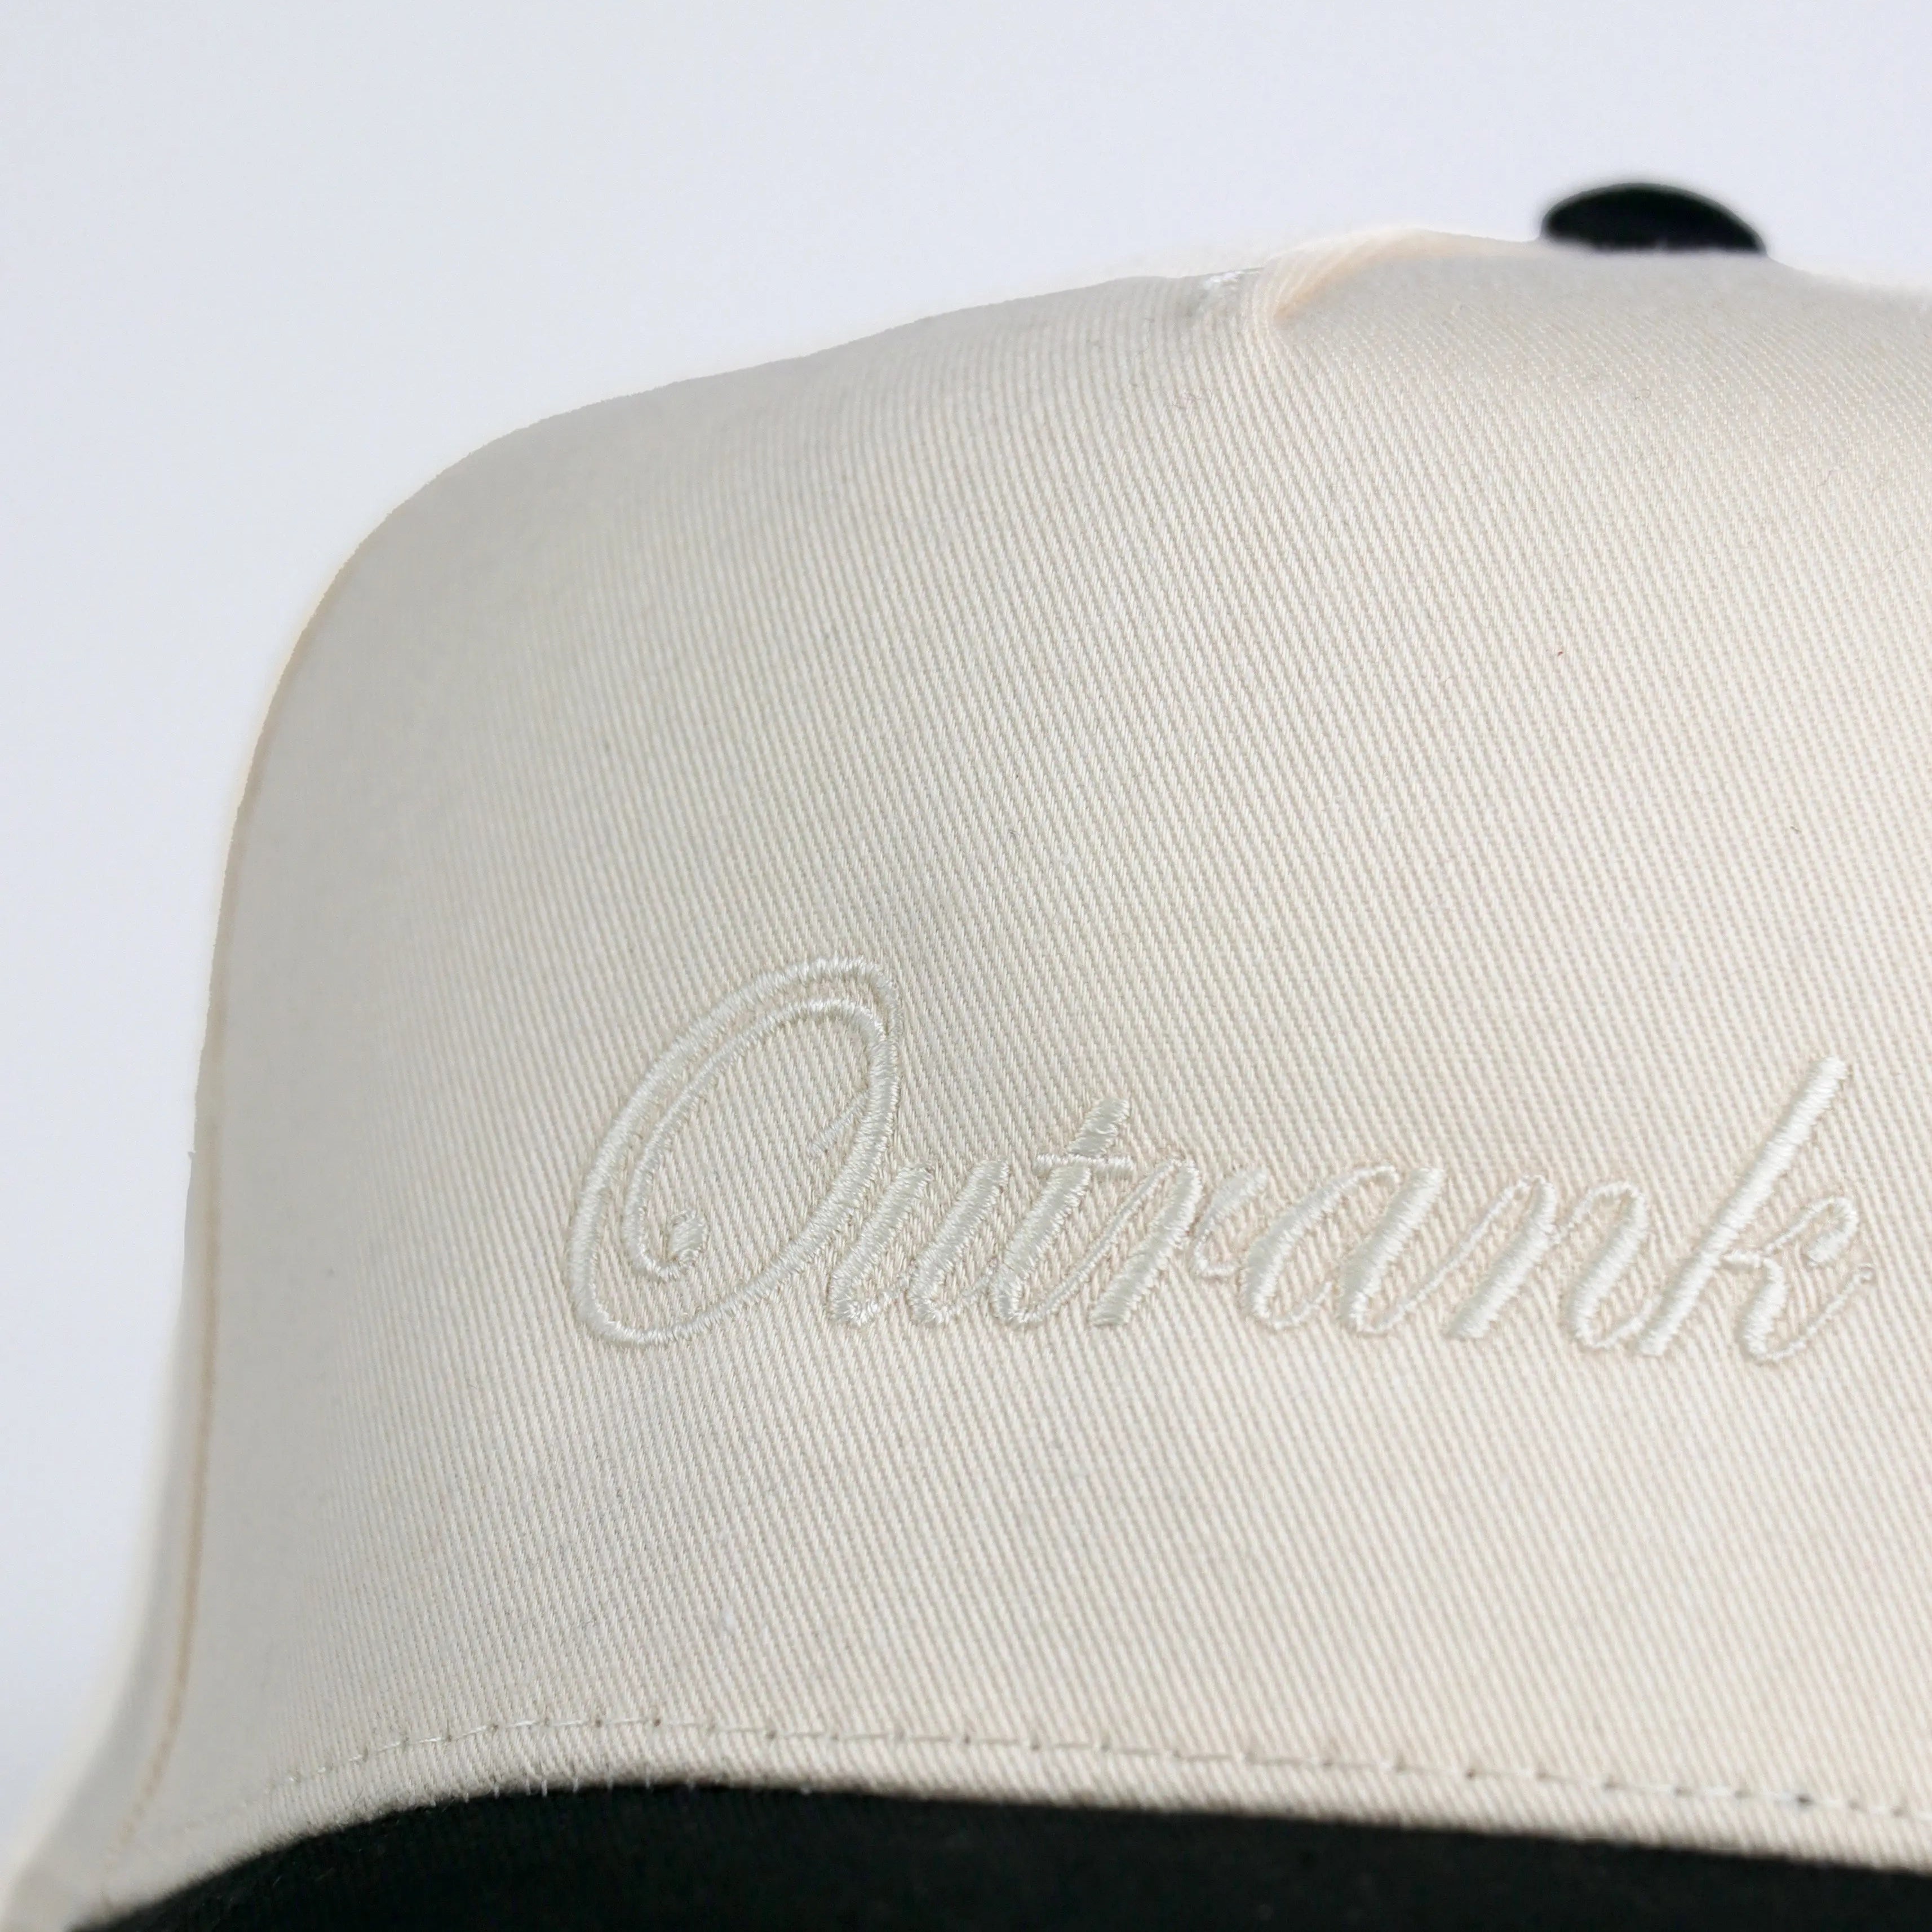 Outrank Every Day Snapback Hat - Outrank